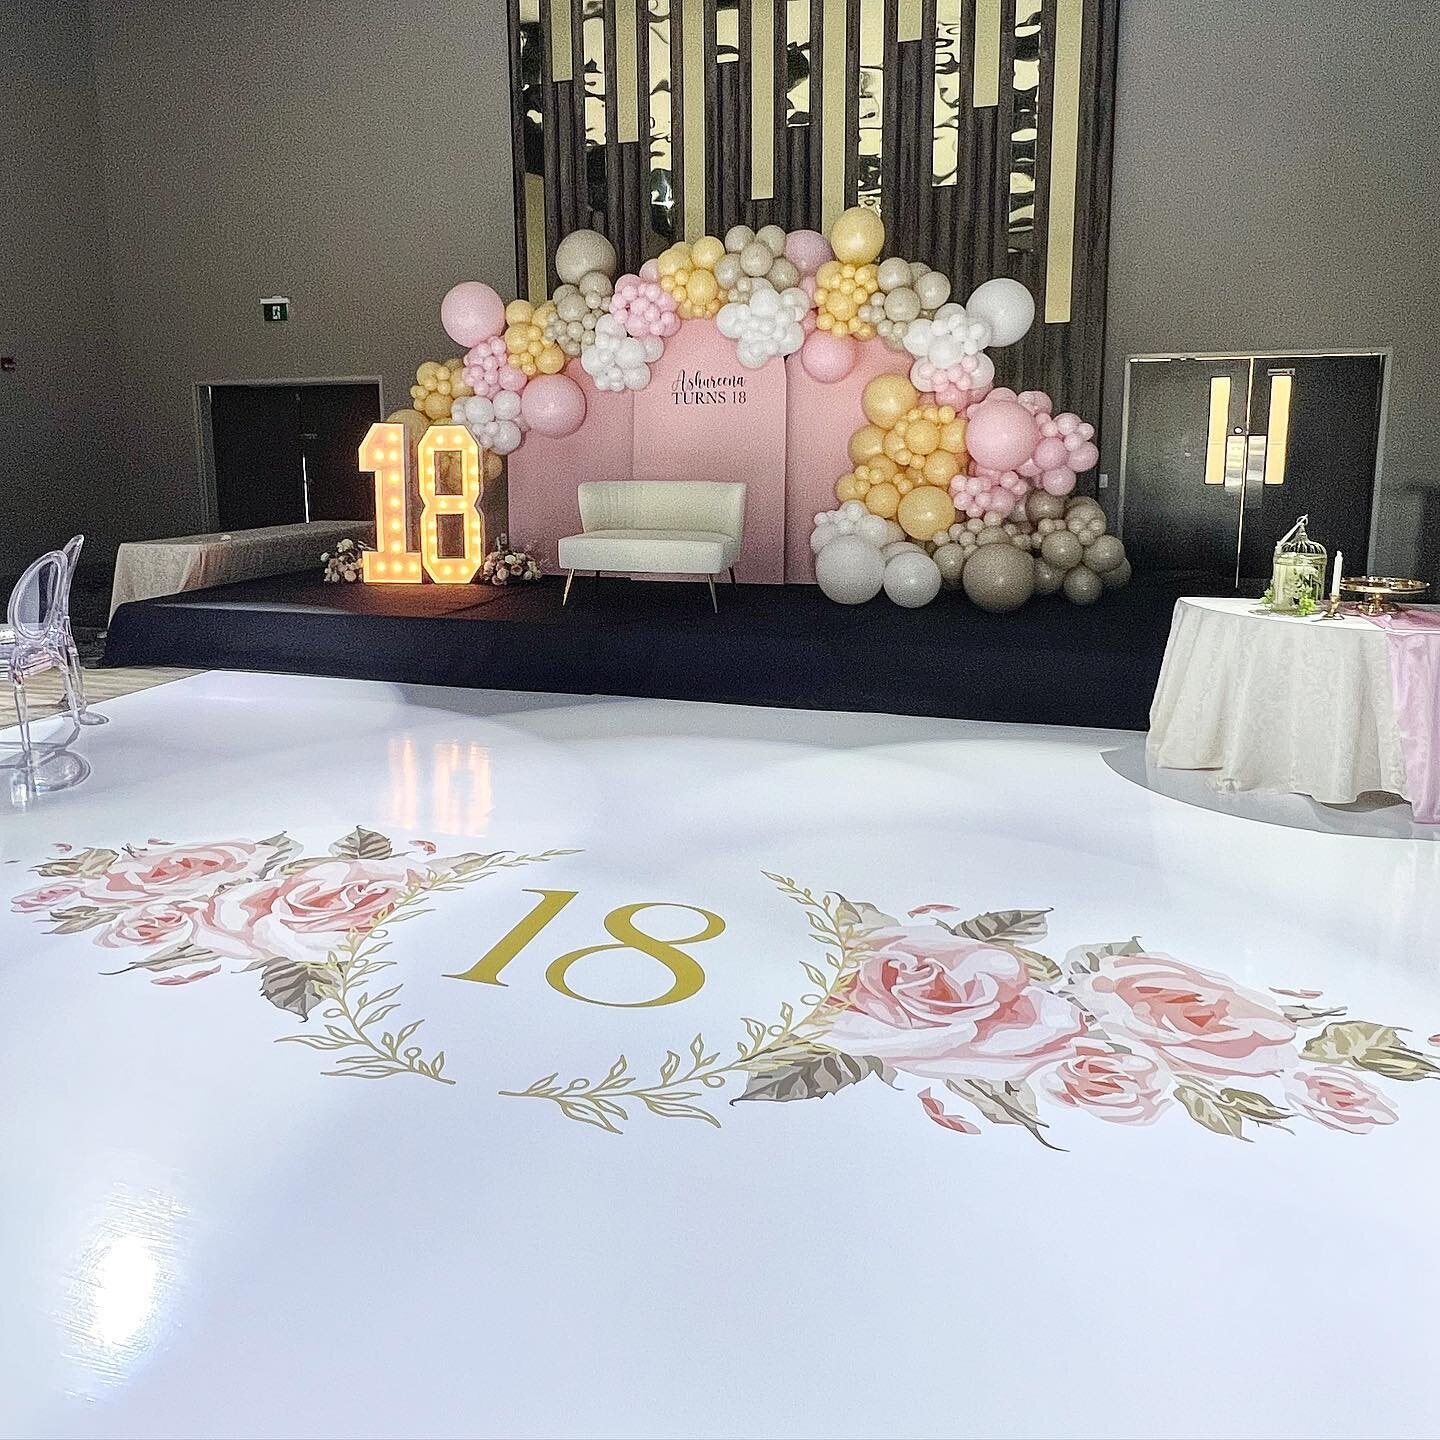 Transform any event into a floral wonderland with our stunning vinyl floor wraps! 🌸✨ Here's a look at the beautiful design we created for this special 18th birthday celebration at Queens Manor

#weddingdecor&nbsp;#bride&nbsp;#groom&nbsp;#sangeet #to